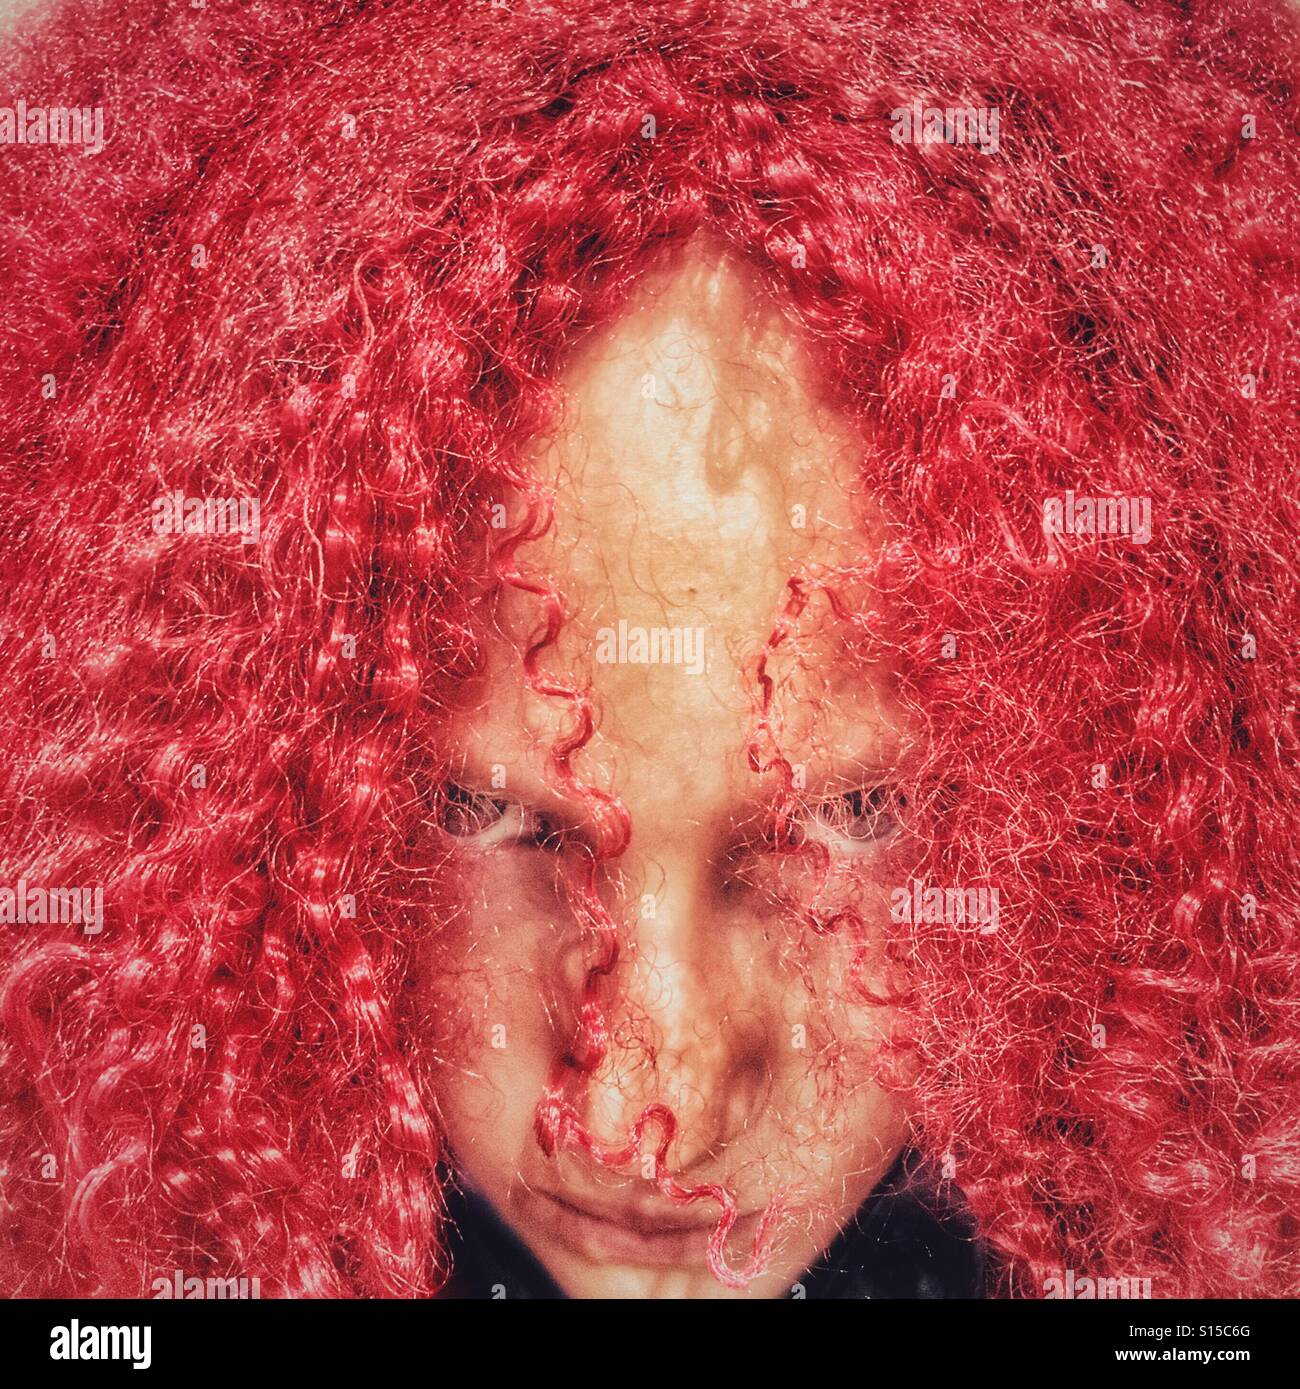 Girl peering out from behind red crimped Halloween wig Stock Photo